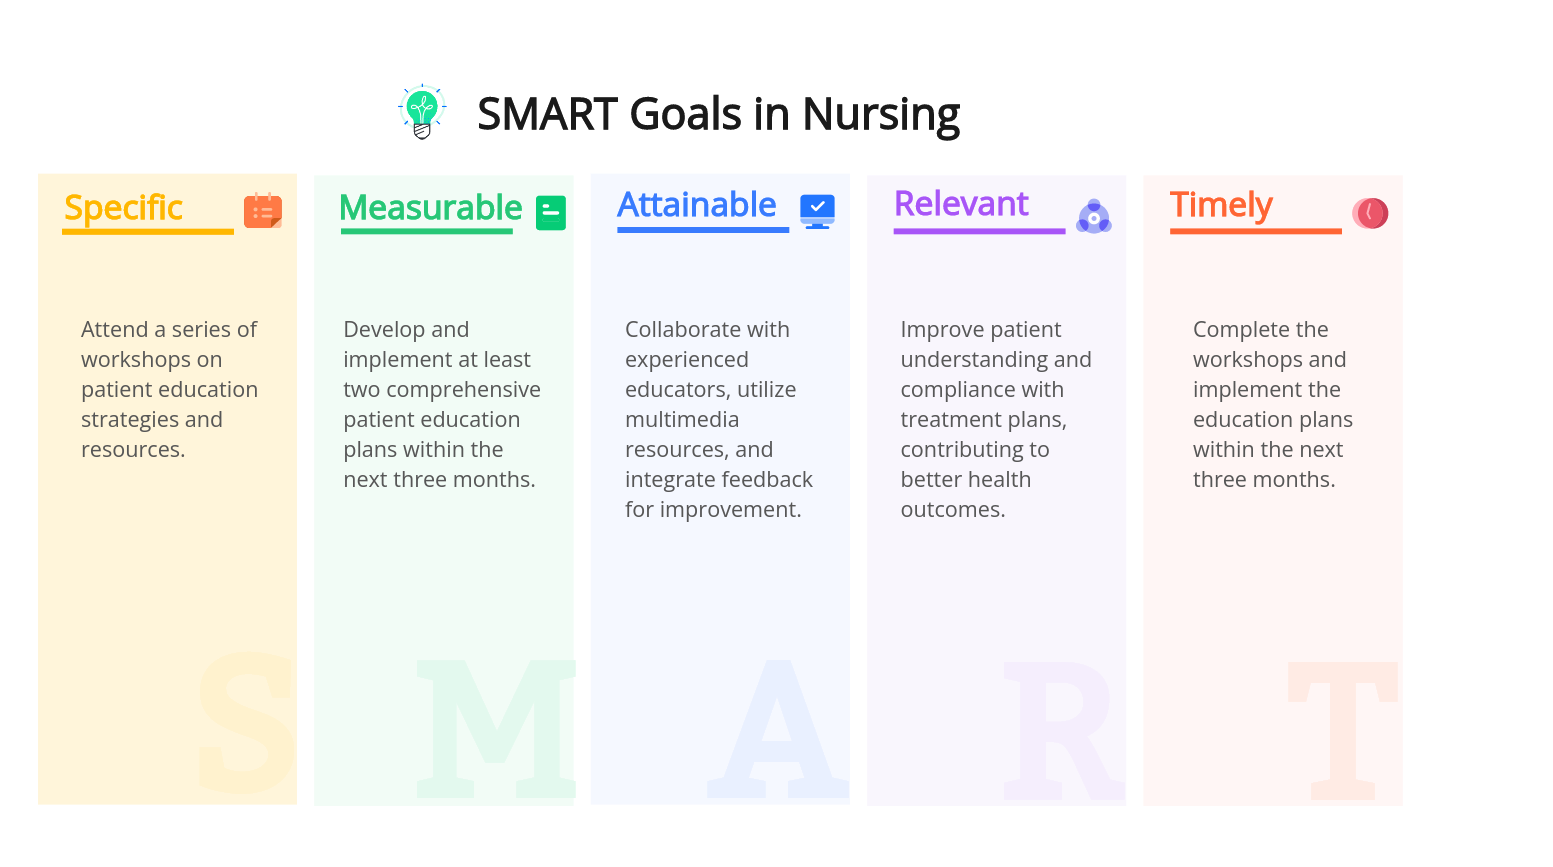 Detailed elaboration of nursing SMART Goals with examples